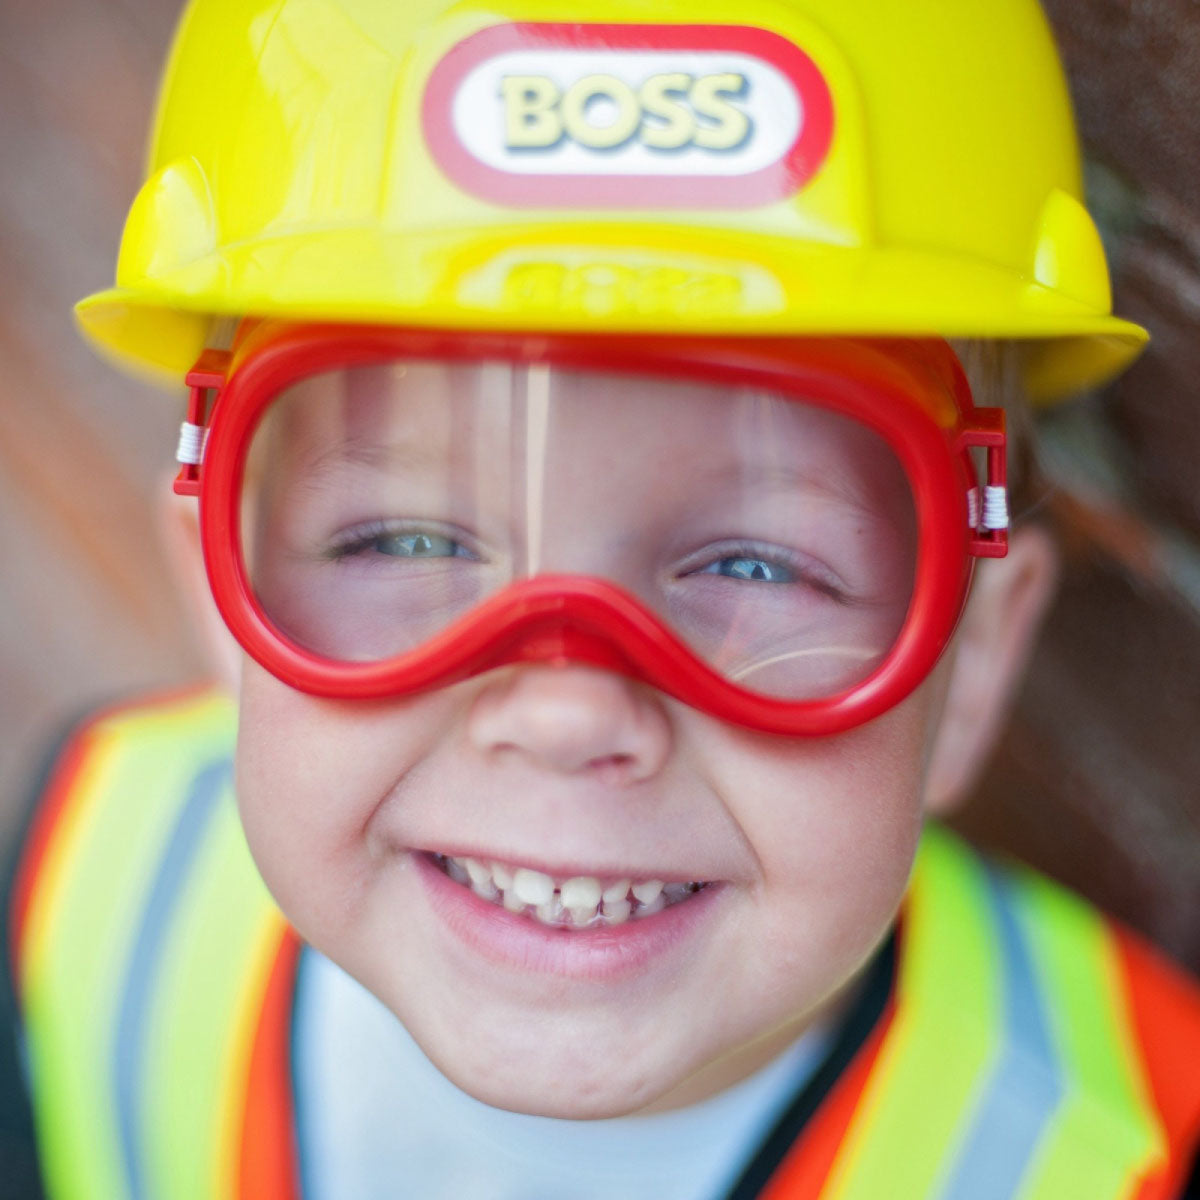 Construction Worker Dress Up Play Set from Great Pretenders